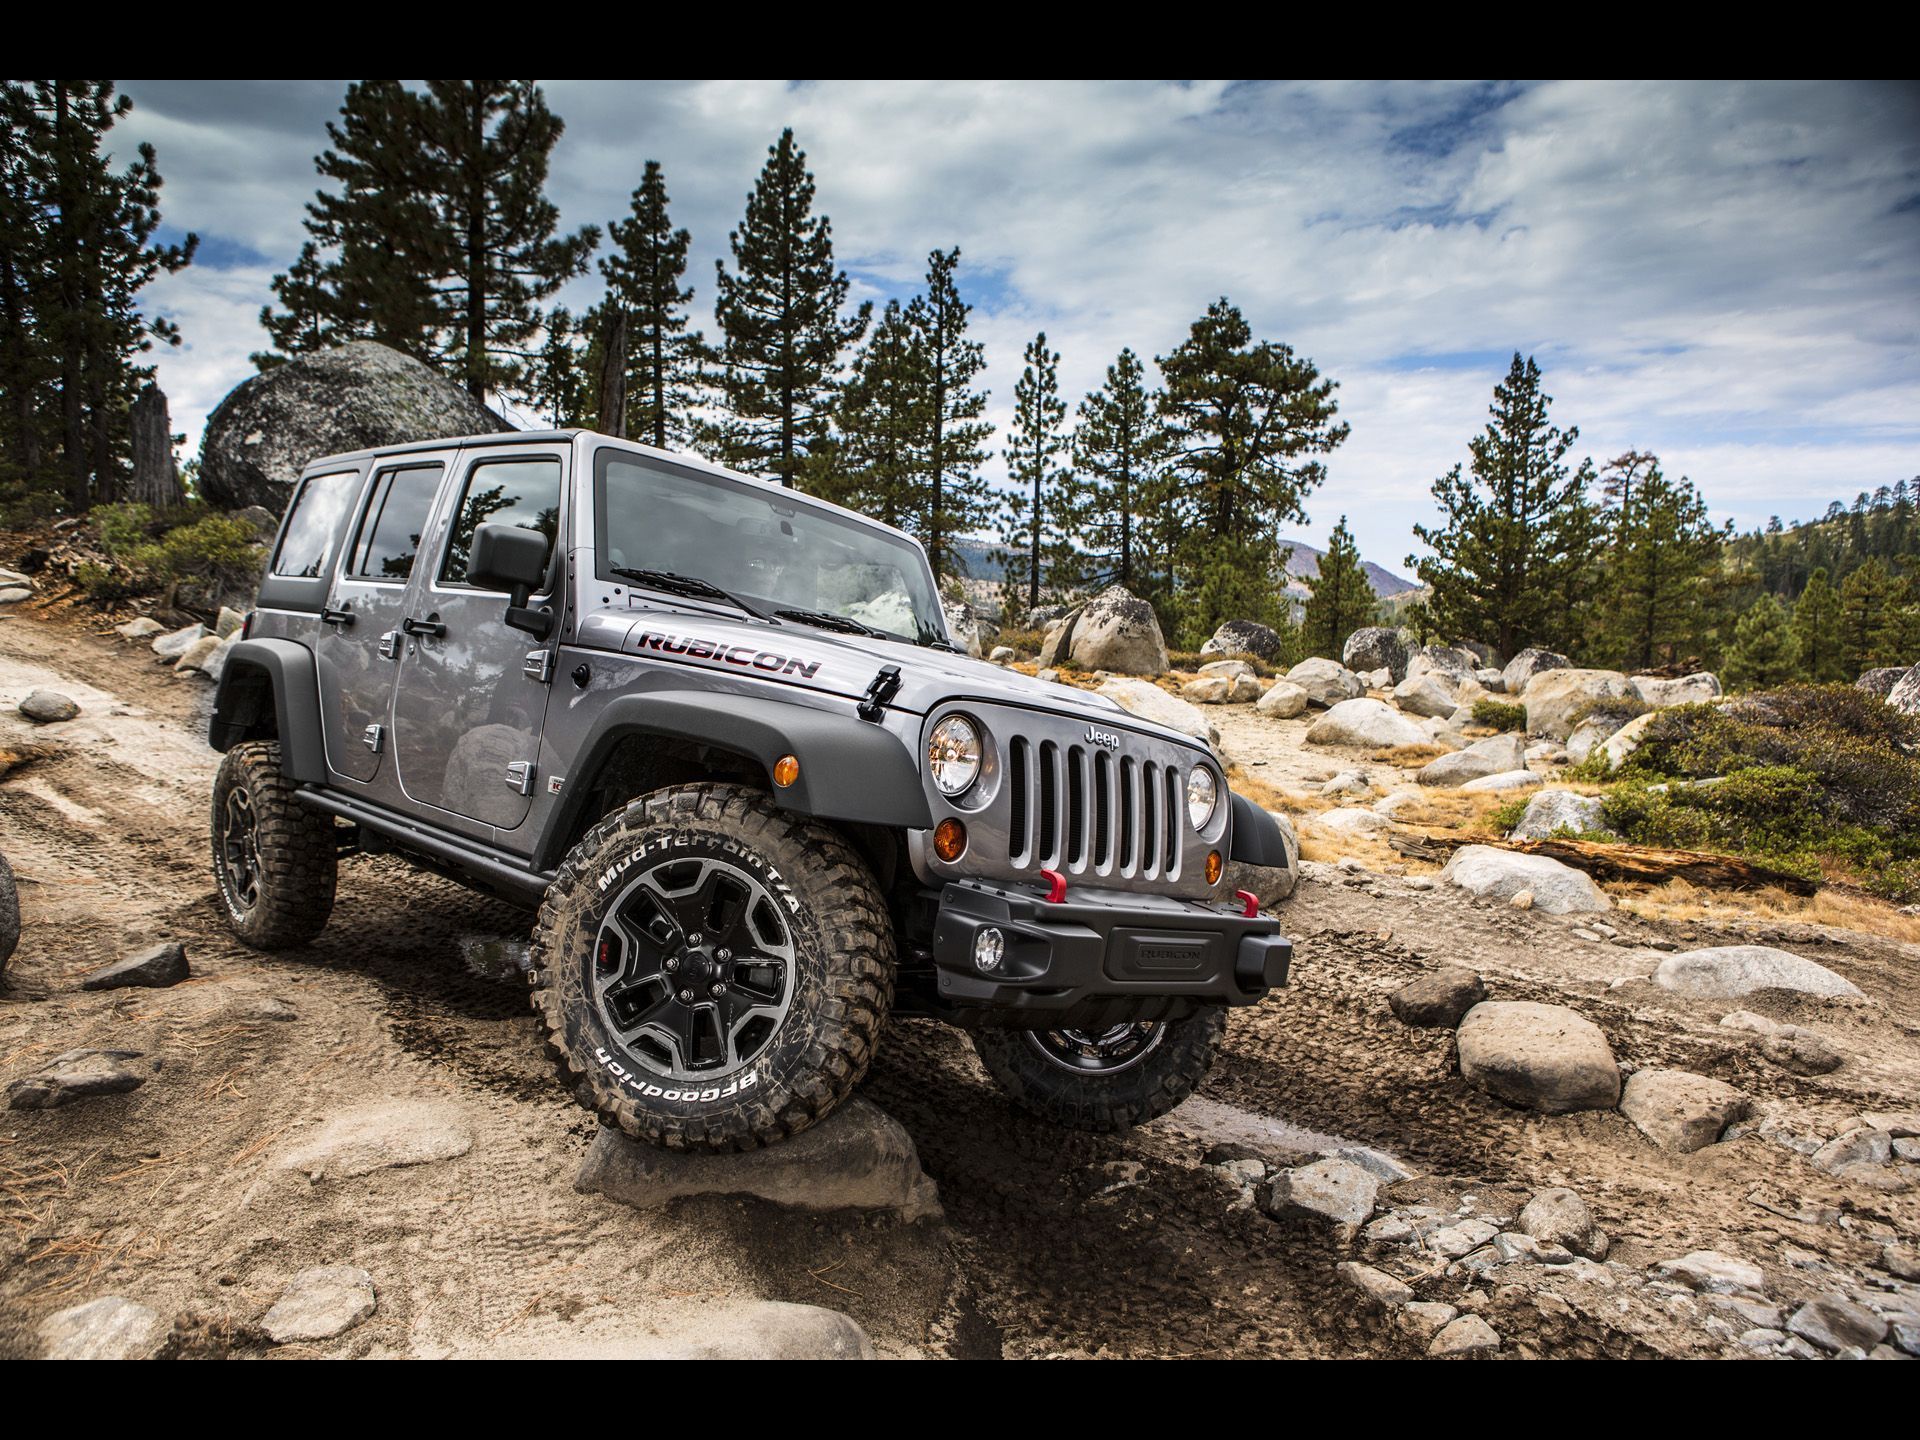 Download 1125x2436 Wallpaper Jeep Wrangler Unlimited 4x4 Moparized Iphone X 1125x2436 Hd Image Background 3932